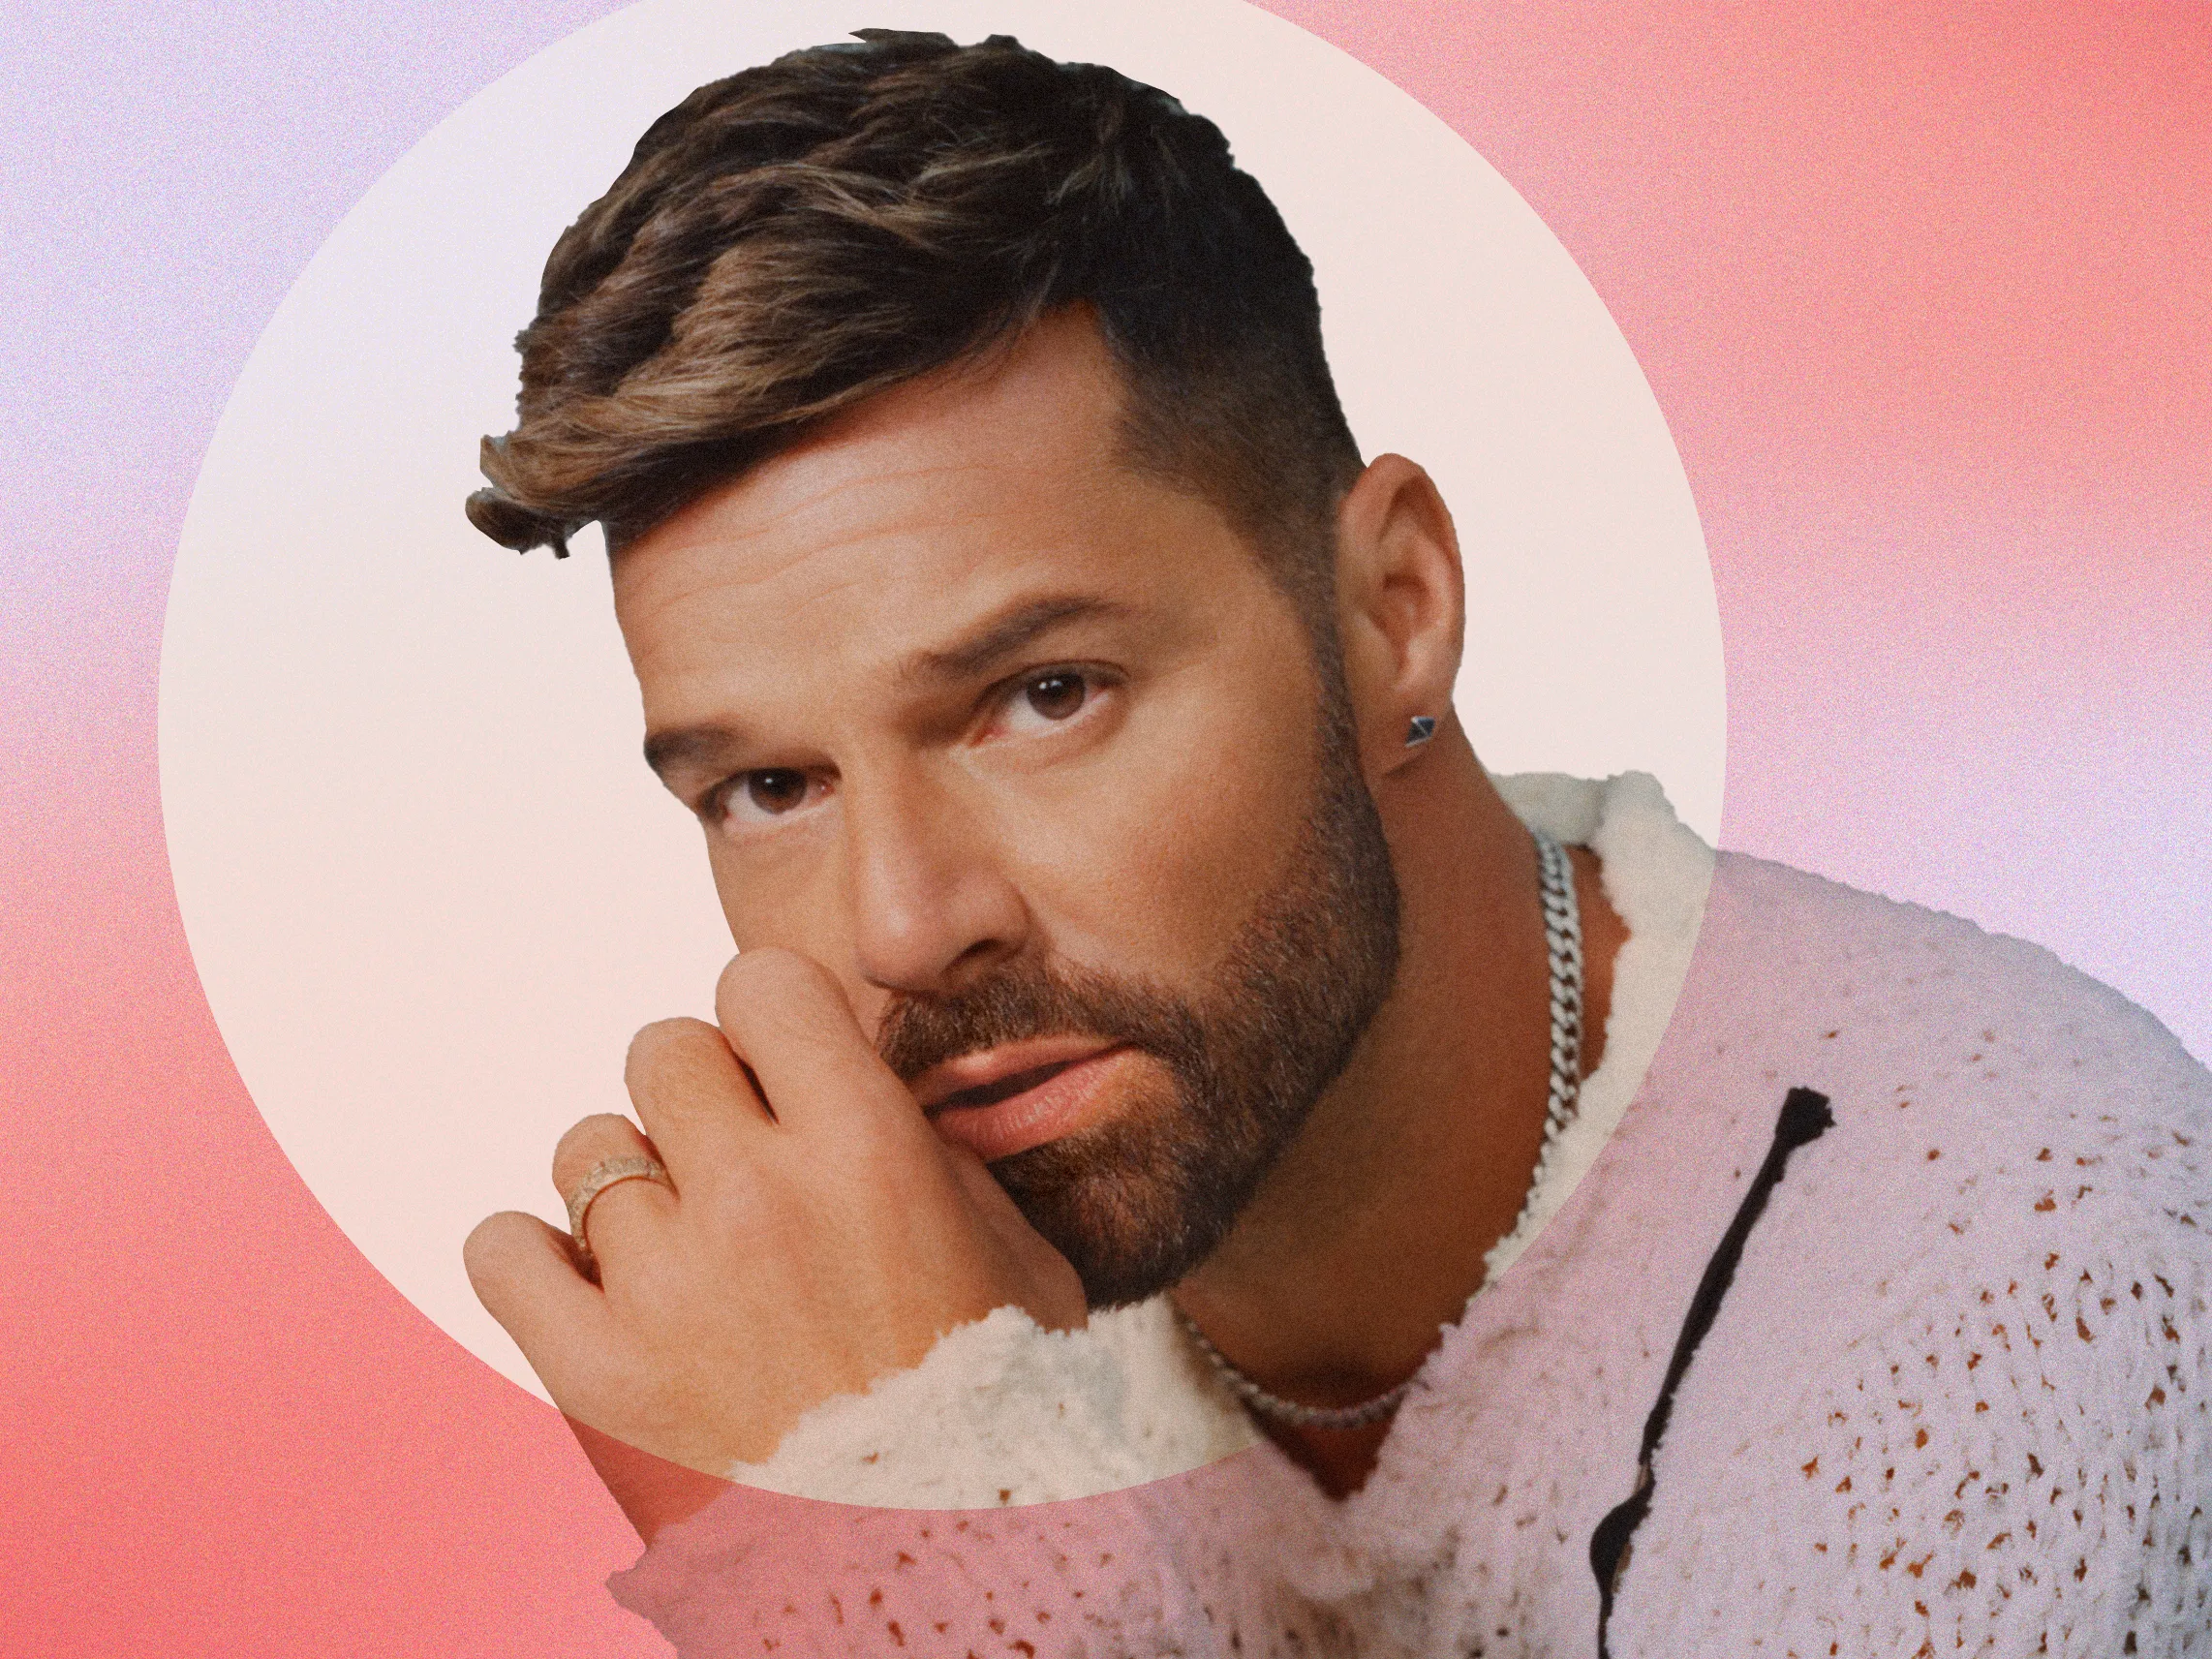 Ricky Martin Biography, Age, Parents, Net Worth, Wife